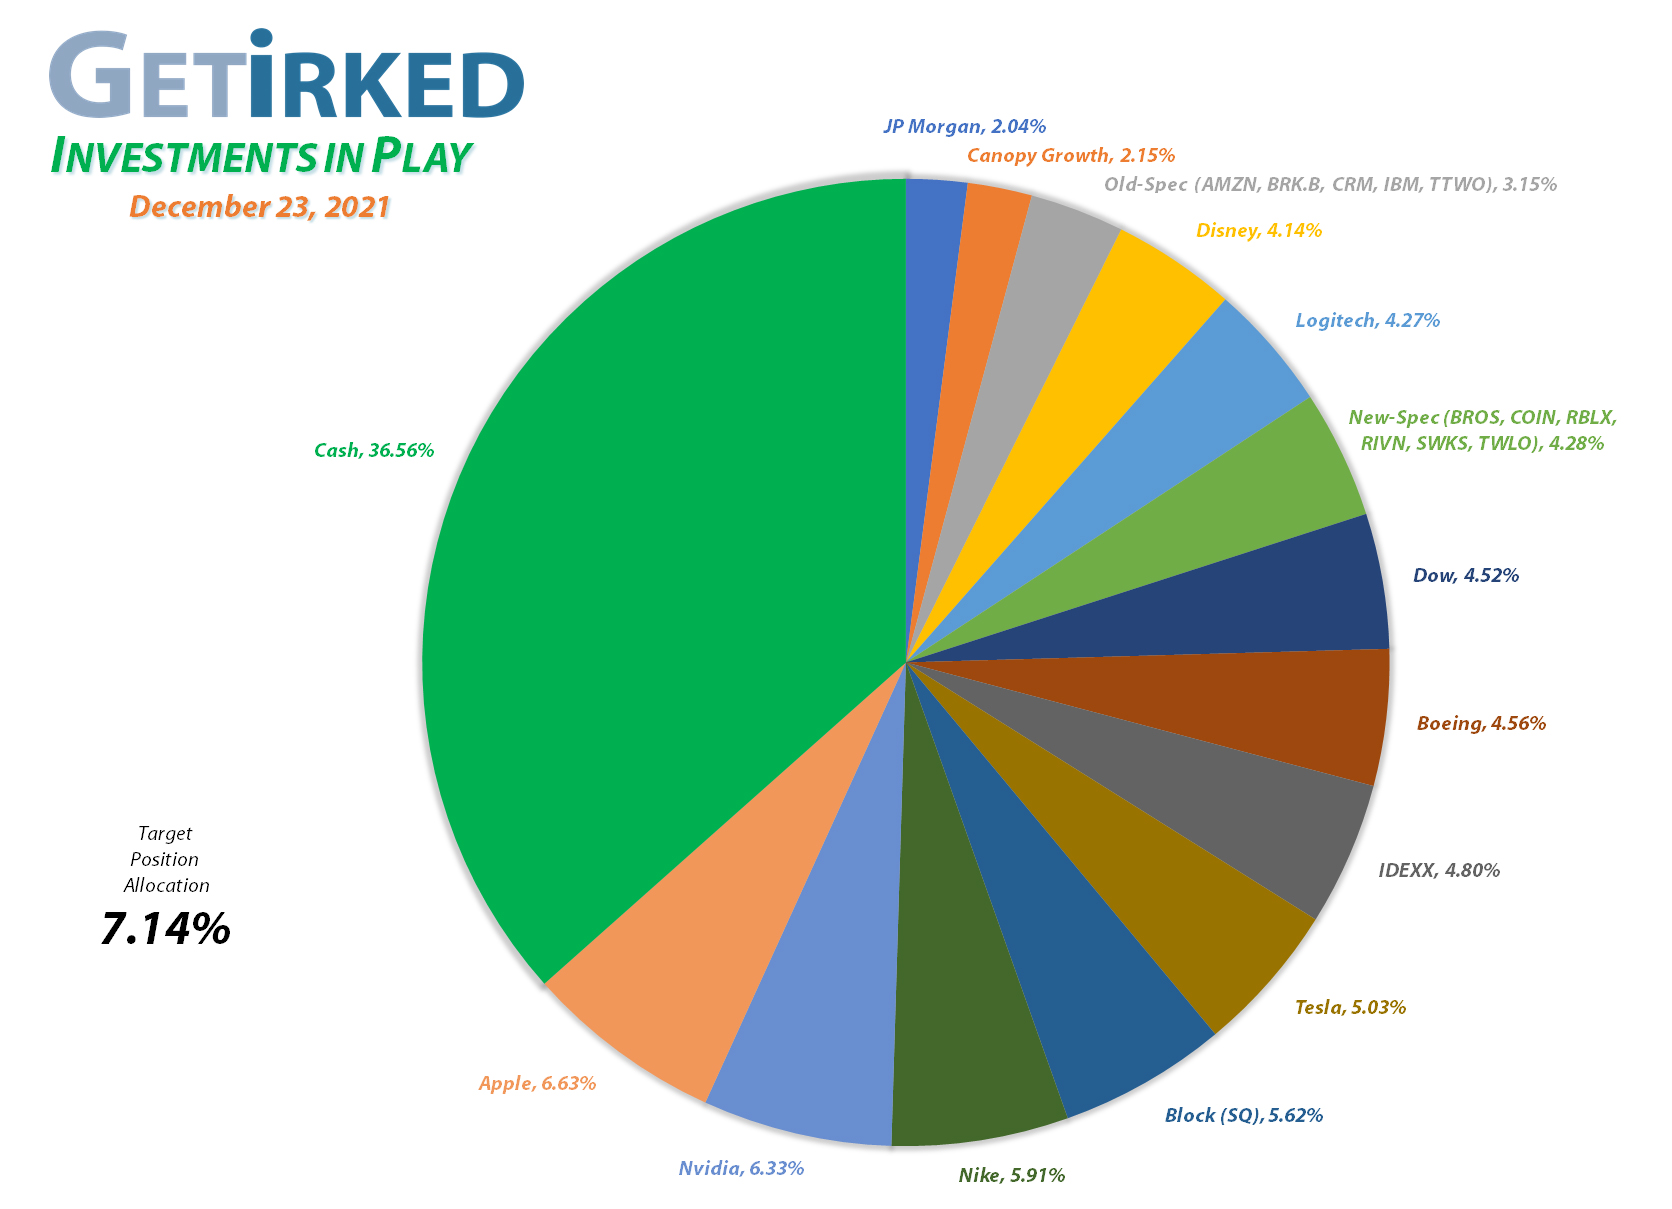 Get Irked - Investments in Play - Current Holdings - March 12, 2021et Irked's Pandemic Portfolio Holdings as of December 23, 2021